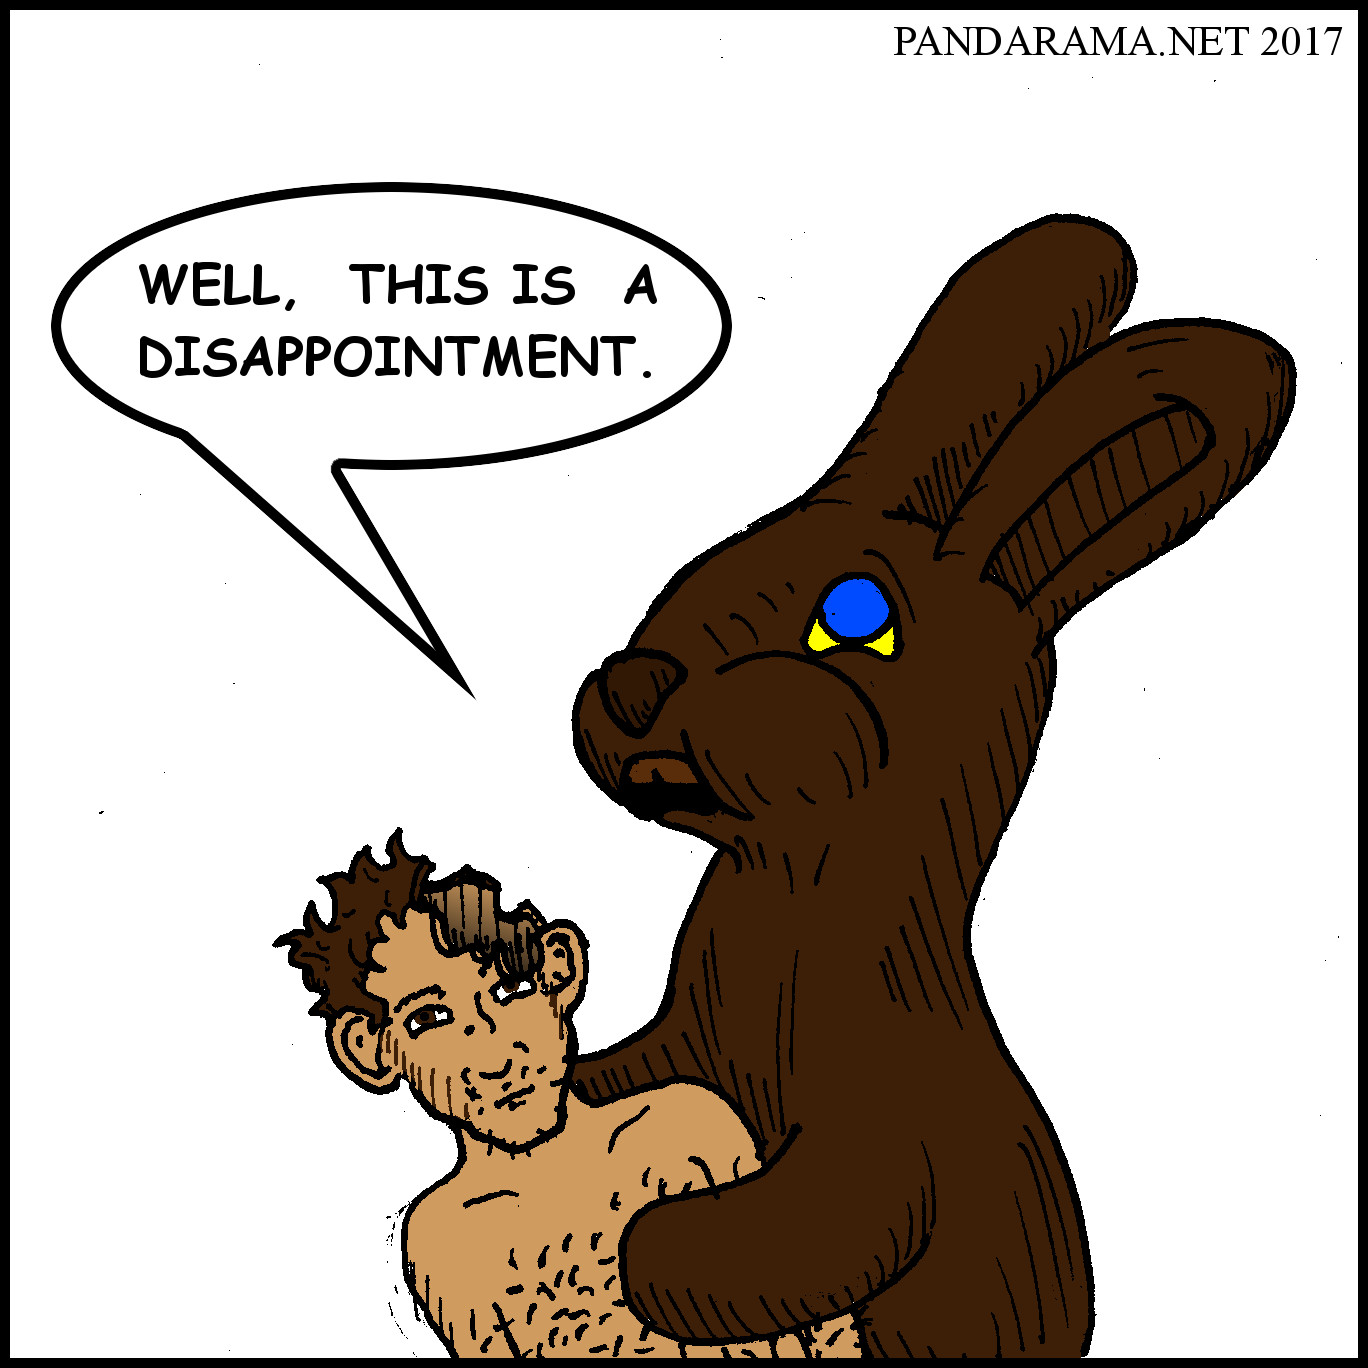 a chocolate bunny bites a man and is disappointed to find out he's hollow.